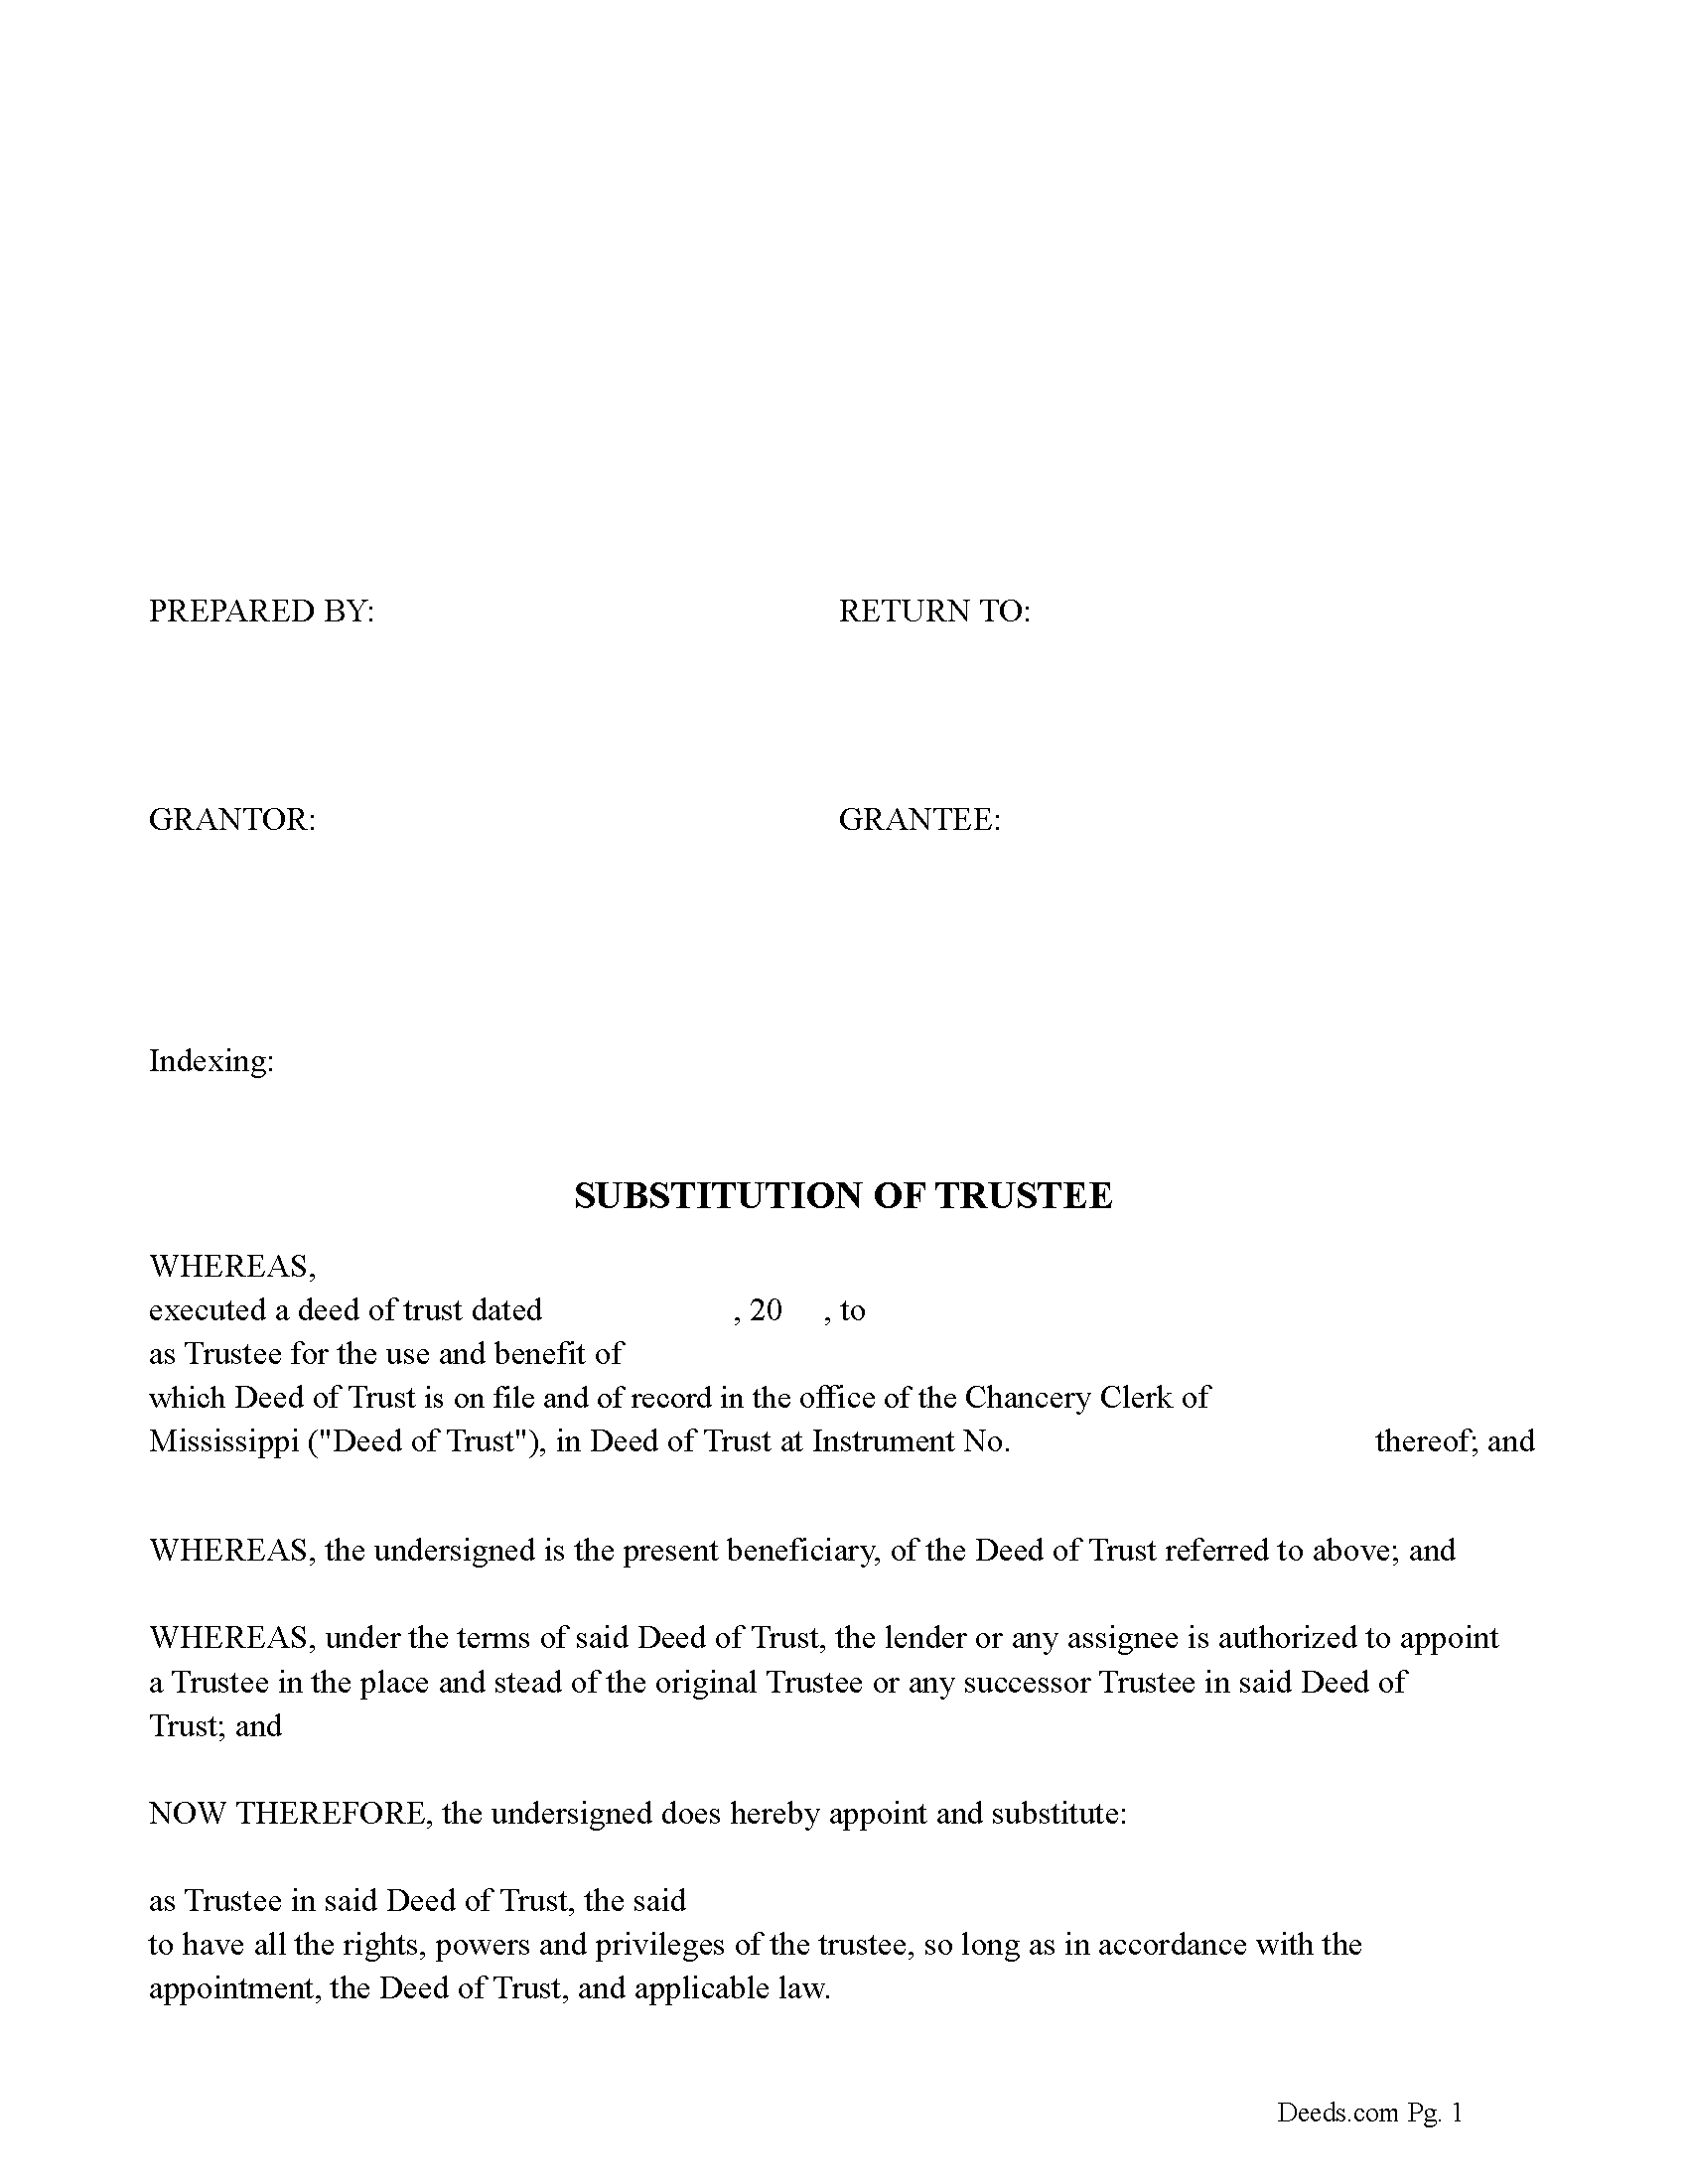 Substitution of Trustee Form